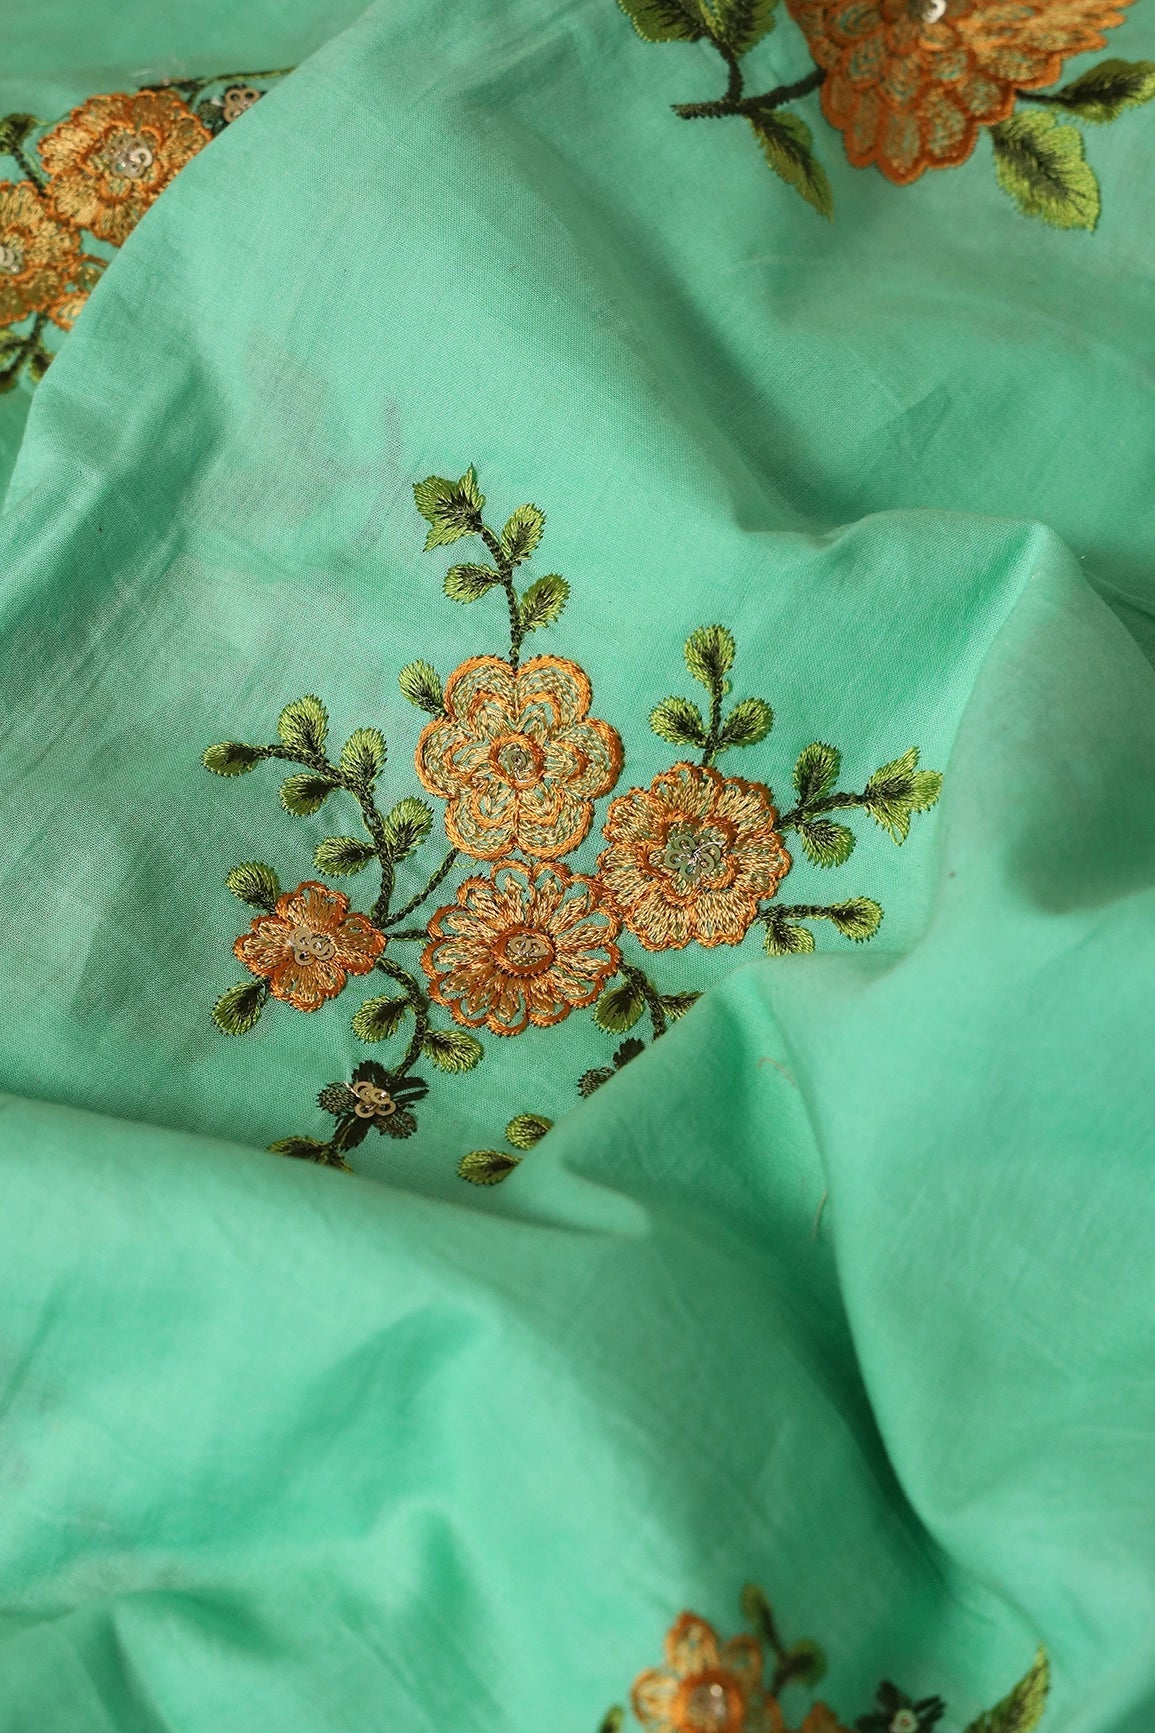 Mustard And Olive Thread Small Floral Embroidery Work On Sea Green Organic Cotton Fabric - doeraa